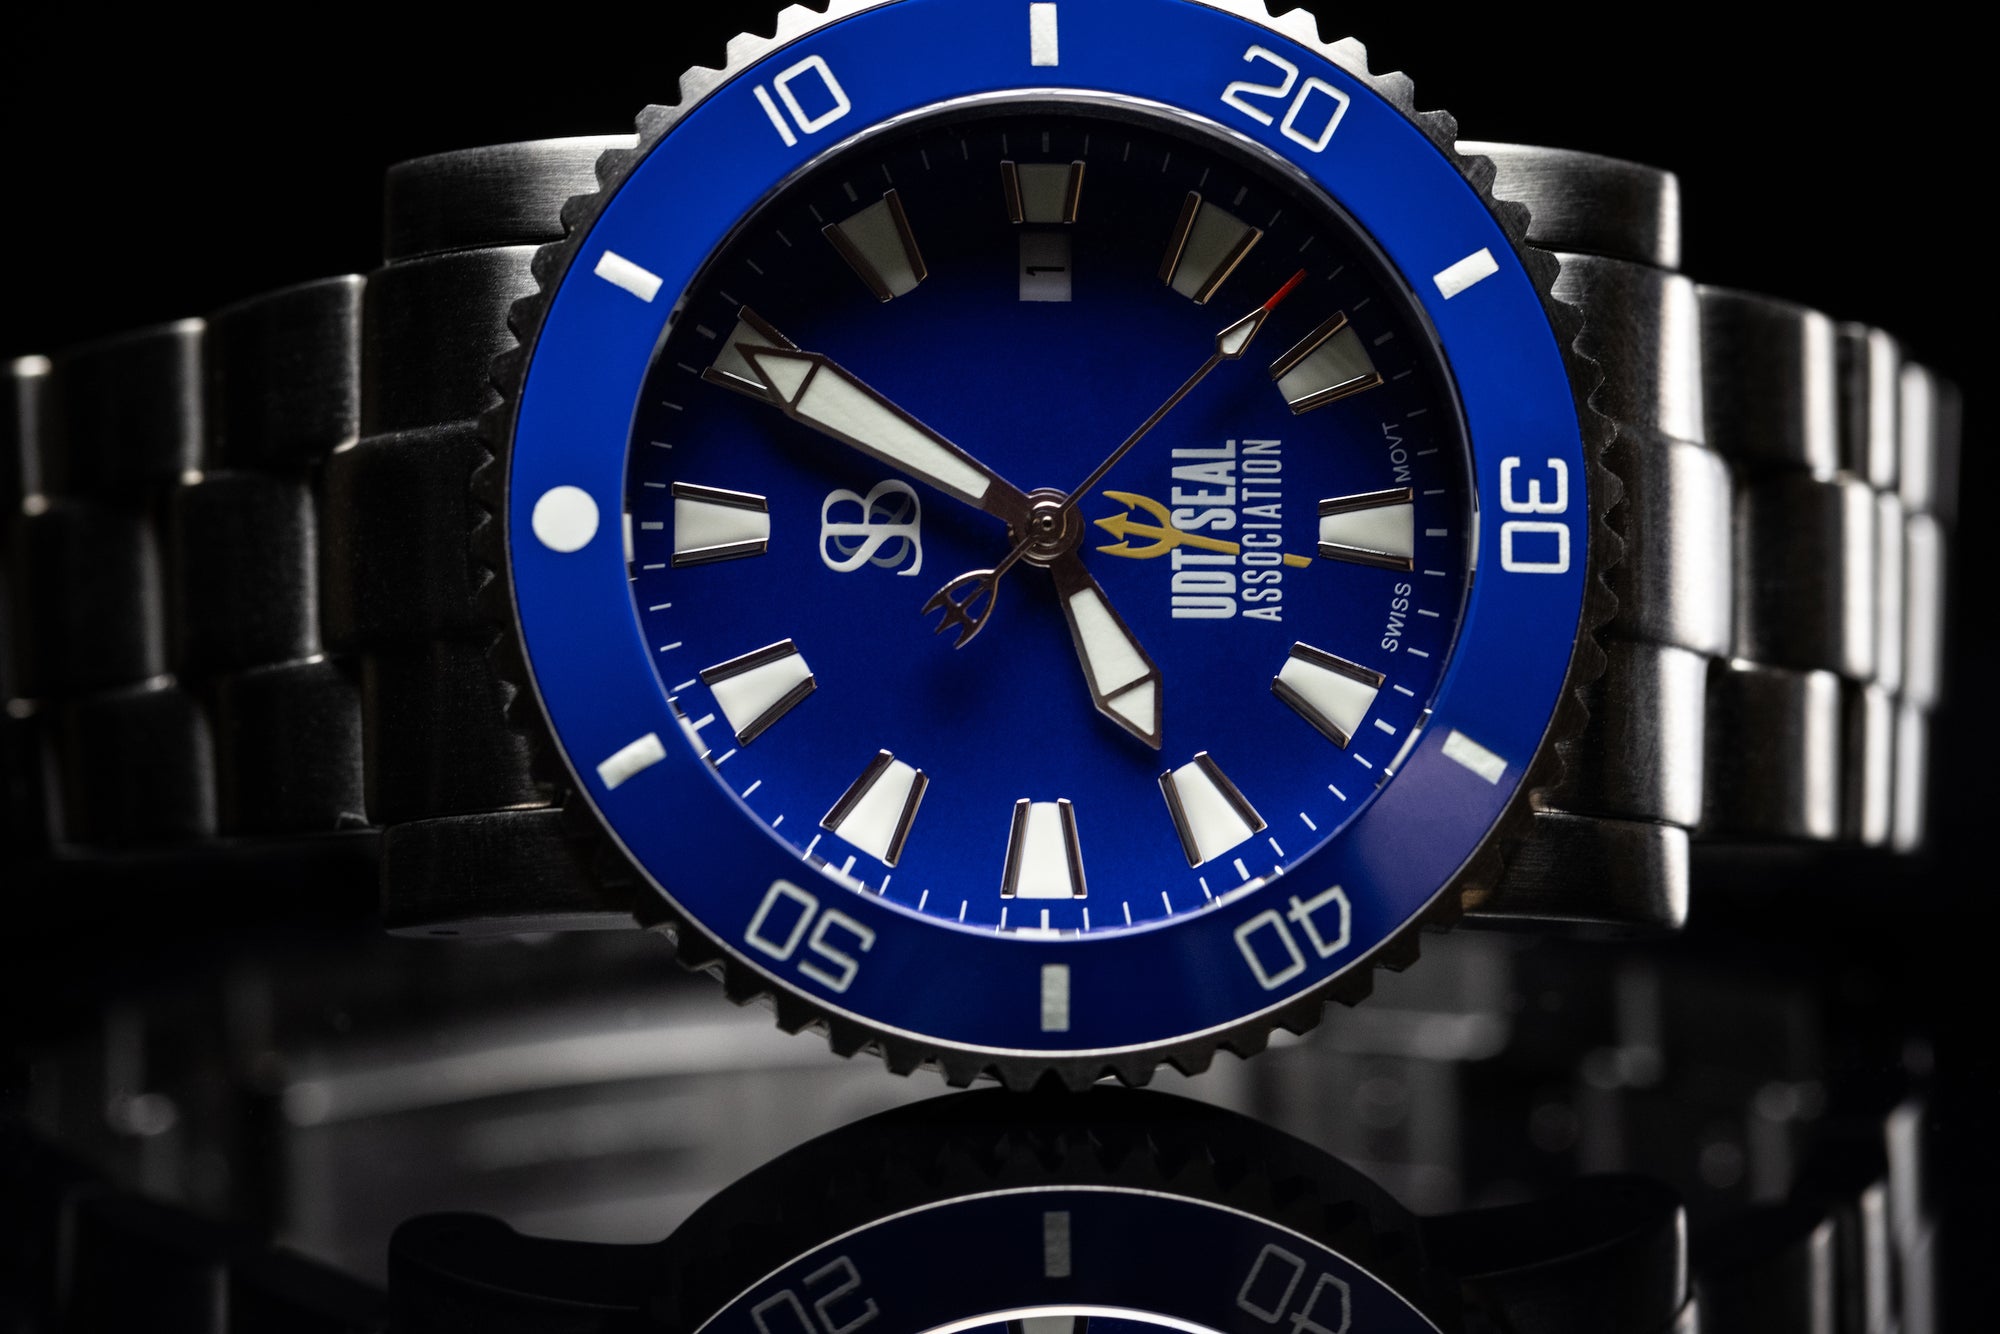 S&B Watches Partner With UDT-SEAL Association